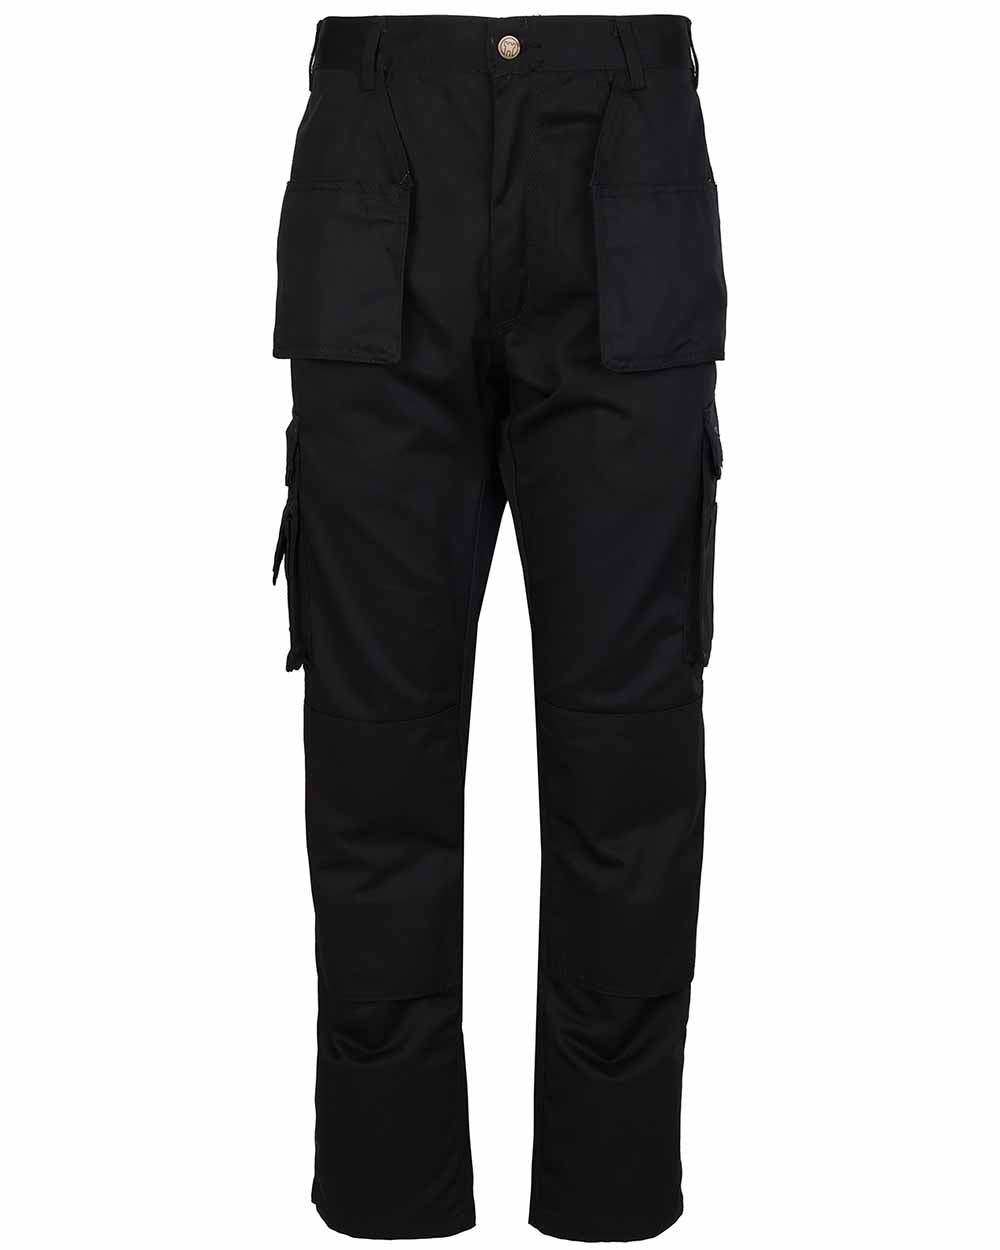 Black Coloured TuffStuff Pro Work Trousers On A White Background 